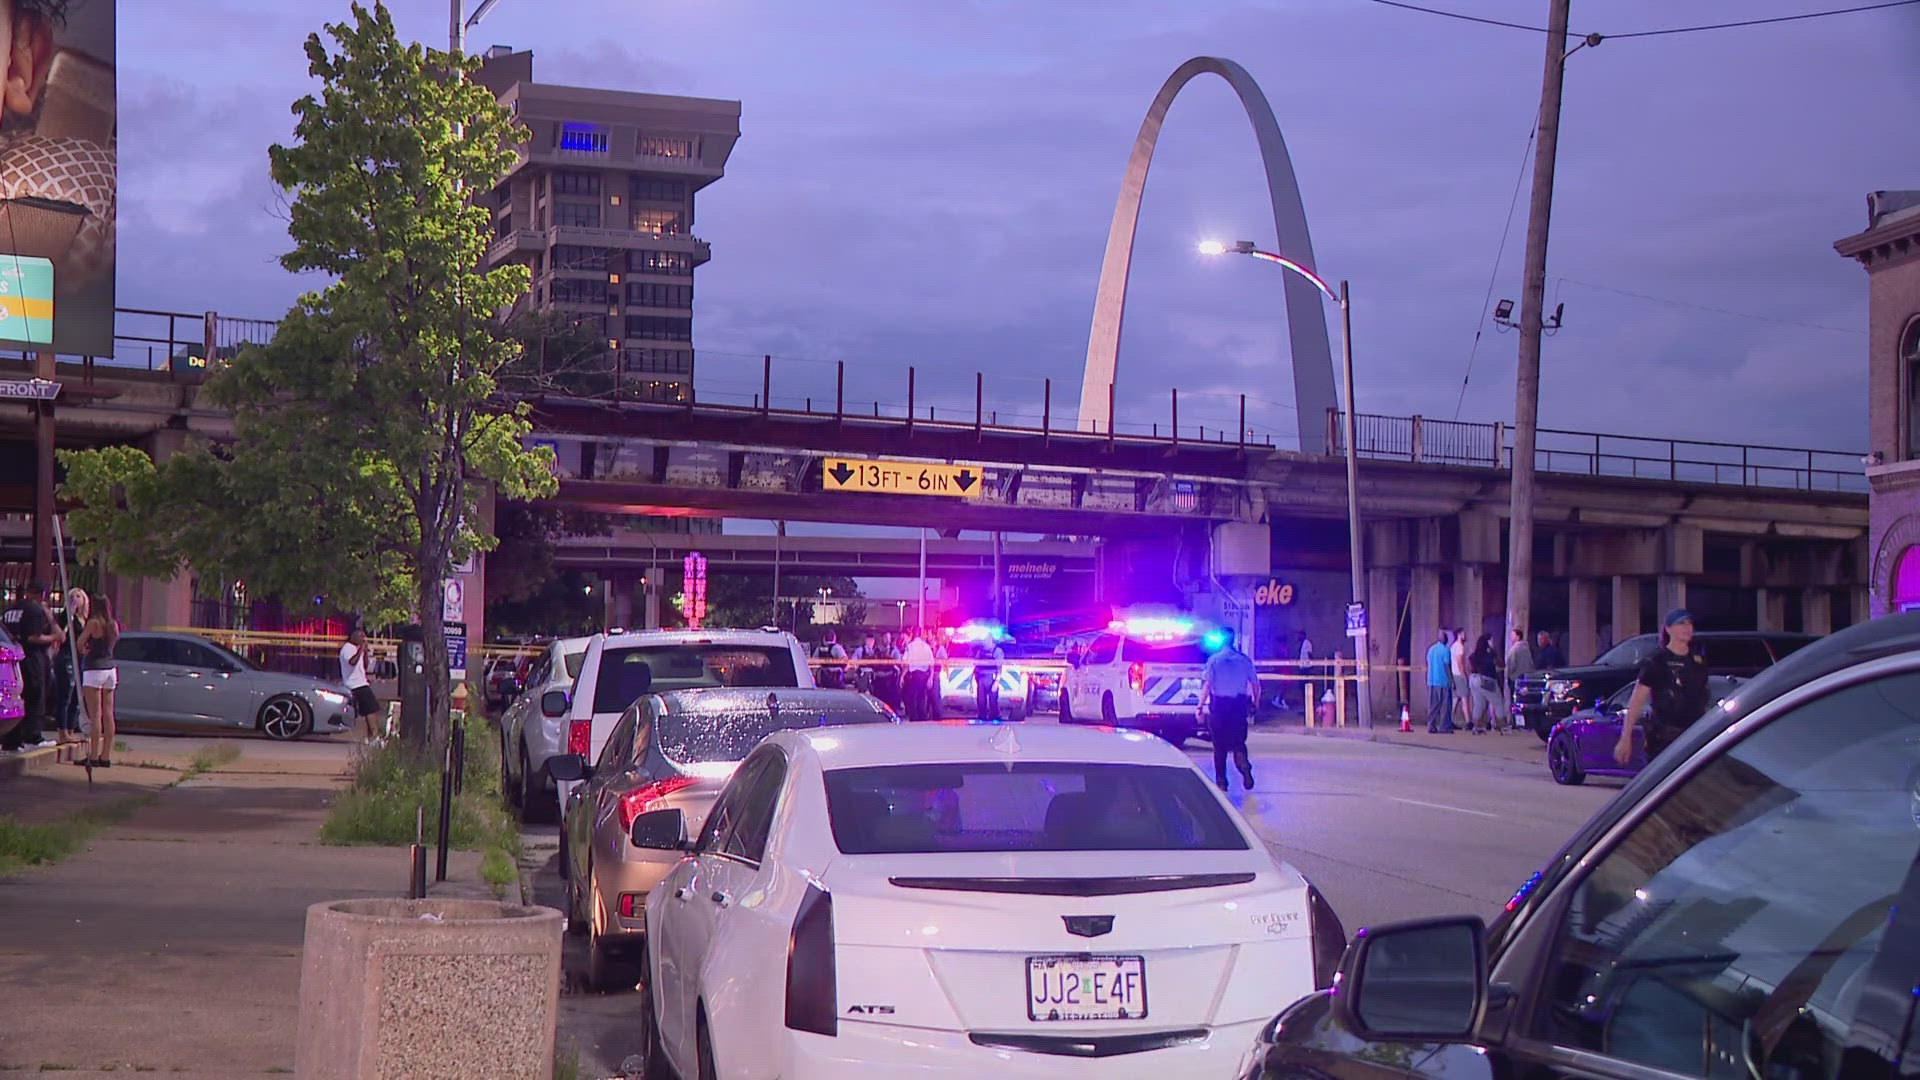 Citizens for a Greater Downtown St. Louis released a statement late Sunday evening in response to recent violence in downtown St. Louis.